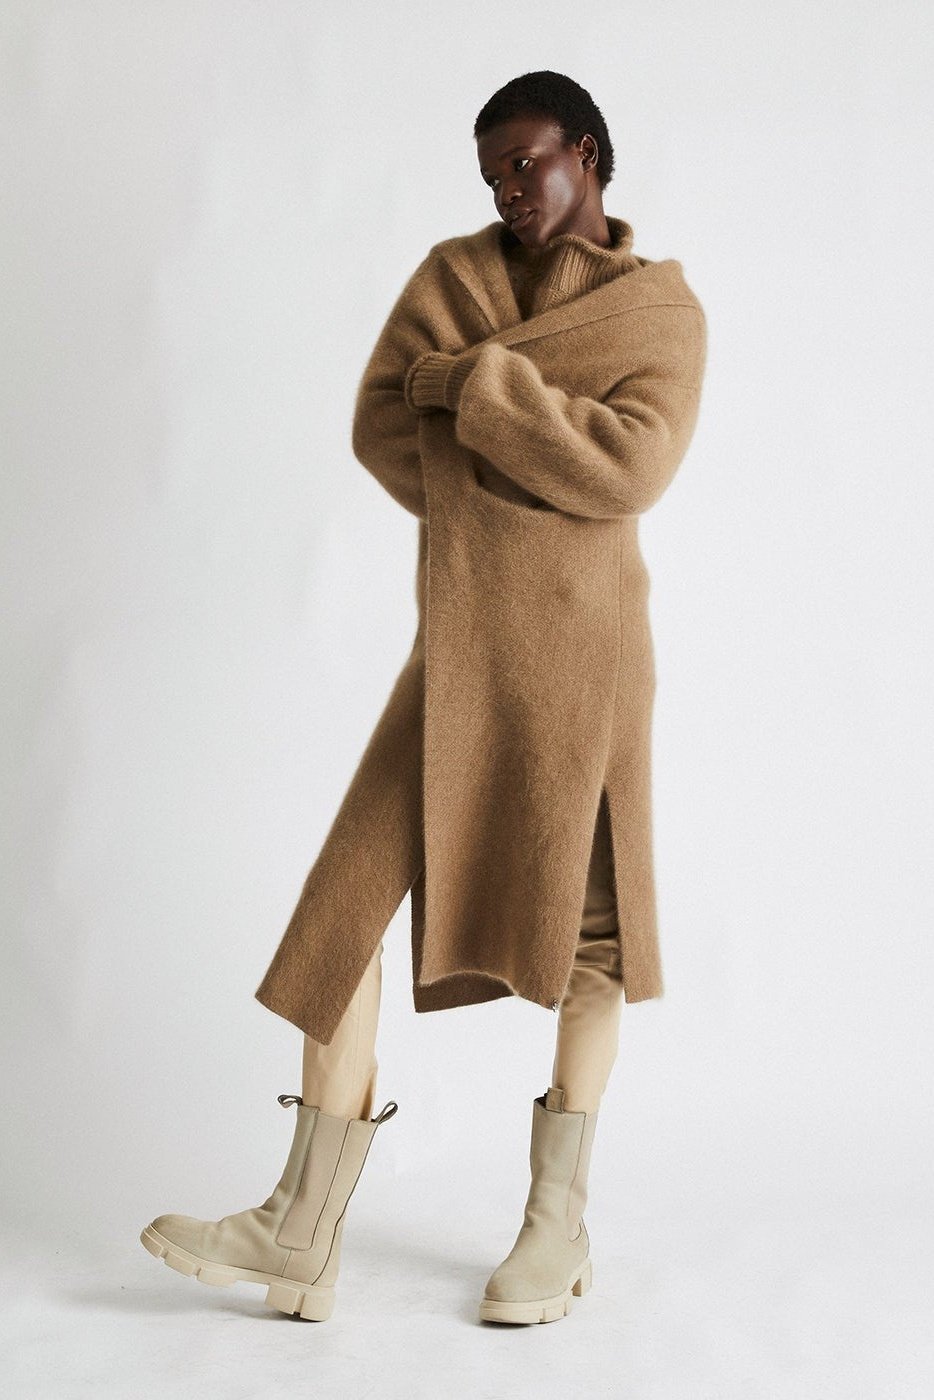 + Beryll Cashmere Coat with Hood | Driftwood - + Beryll Cashmere Coat with Hood | Driftwood - +Beryll Worn By Good People